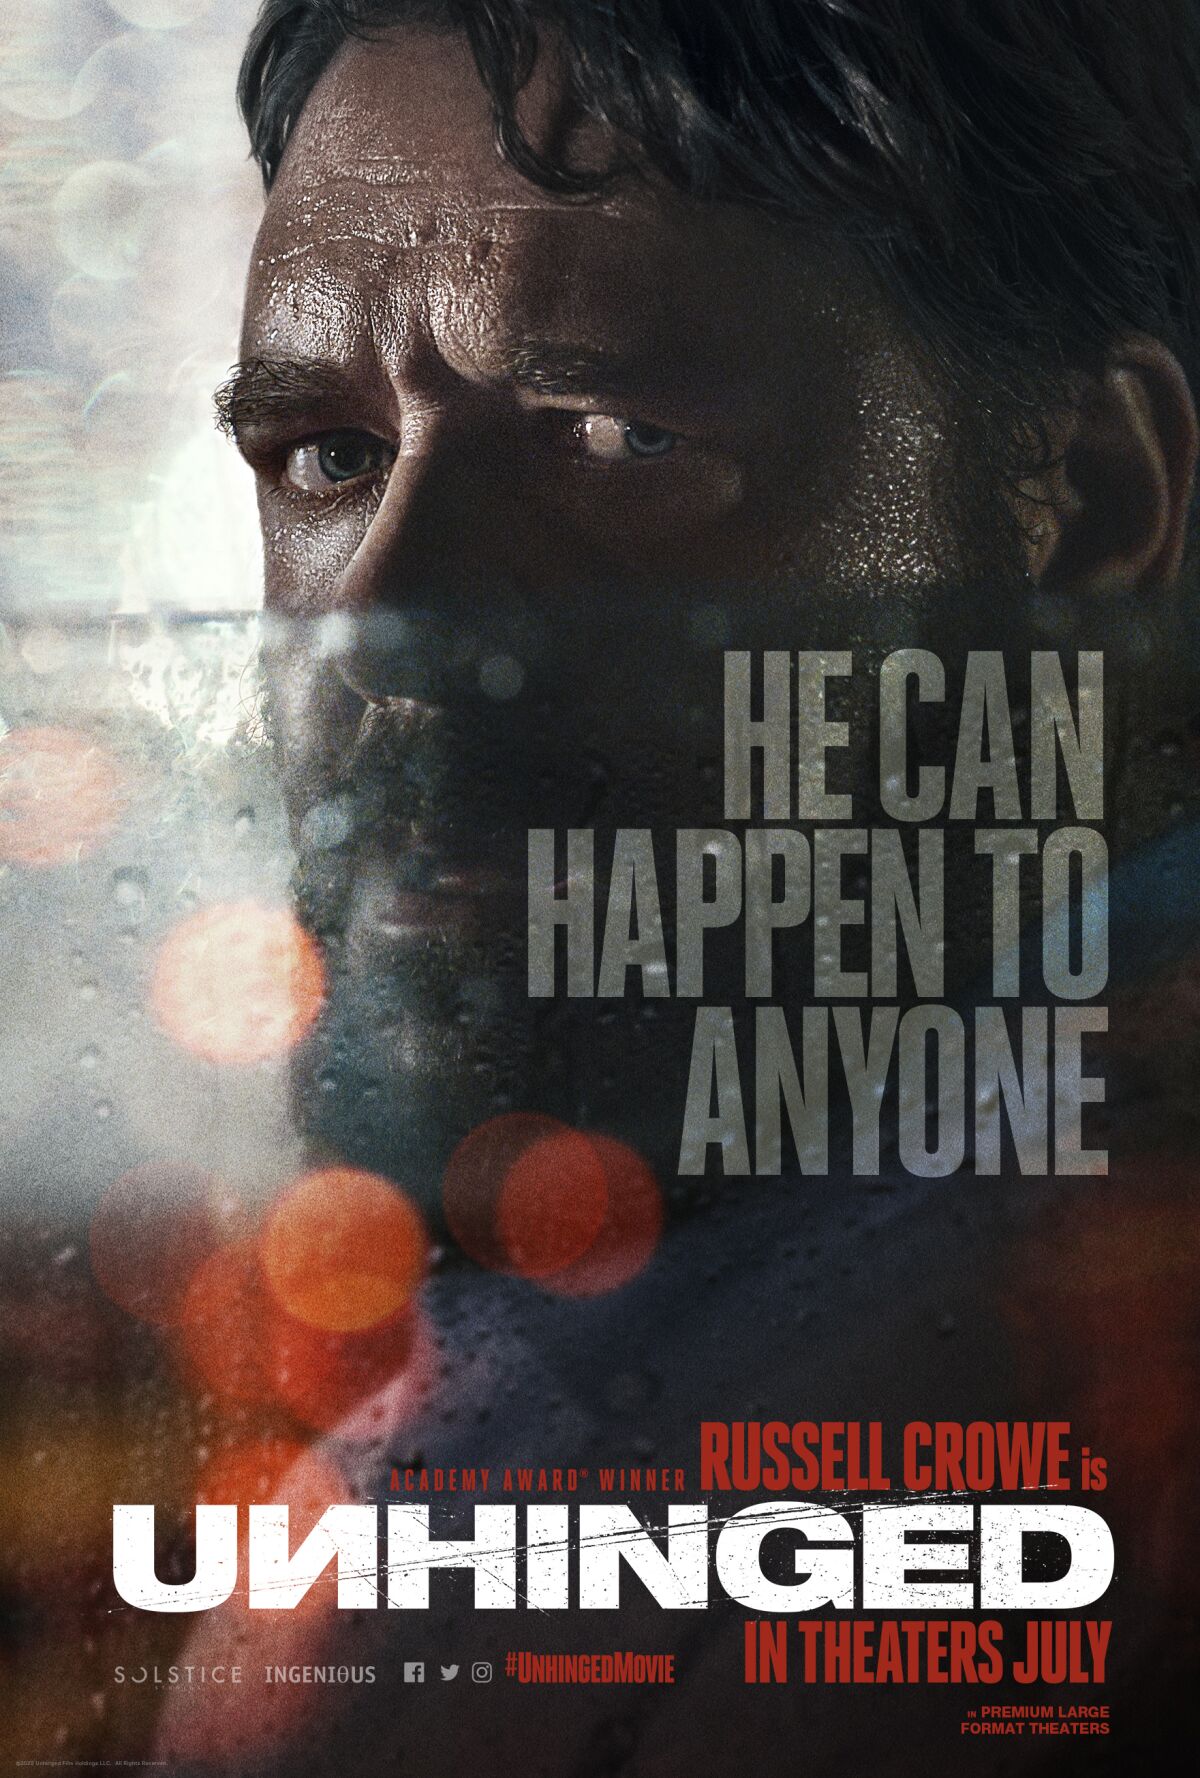 Russell Crowe's 'Unhinged' arrives in theaters July 1.